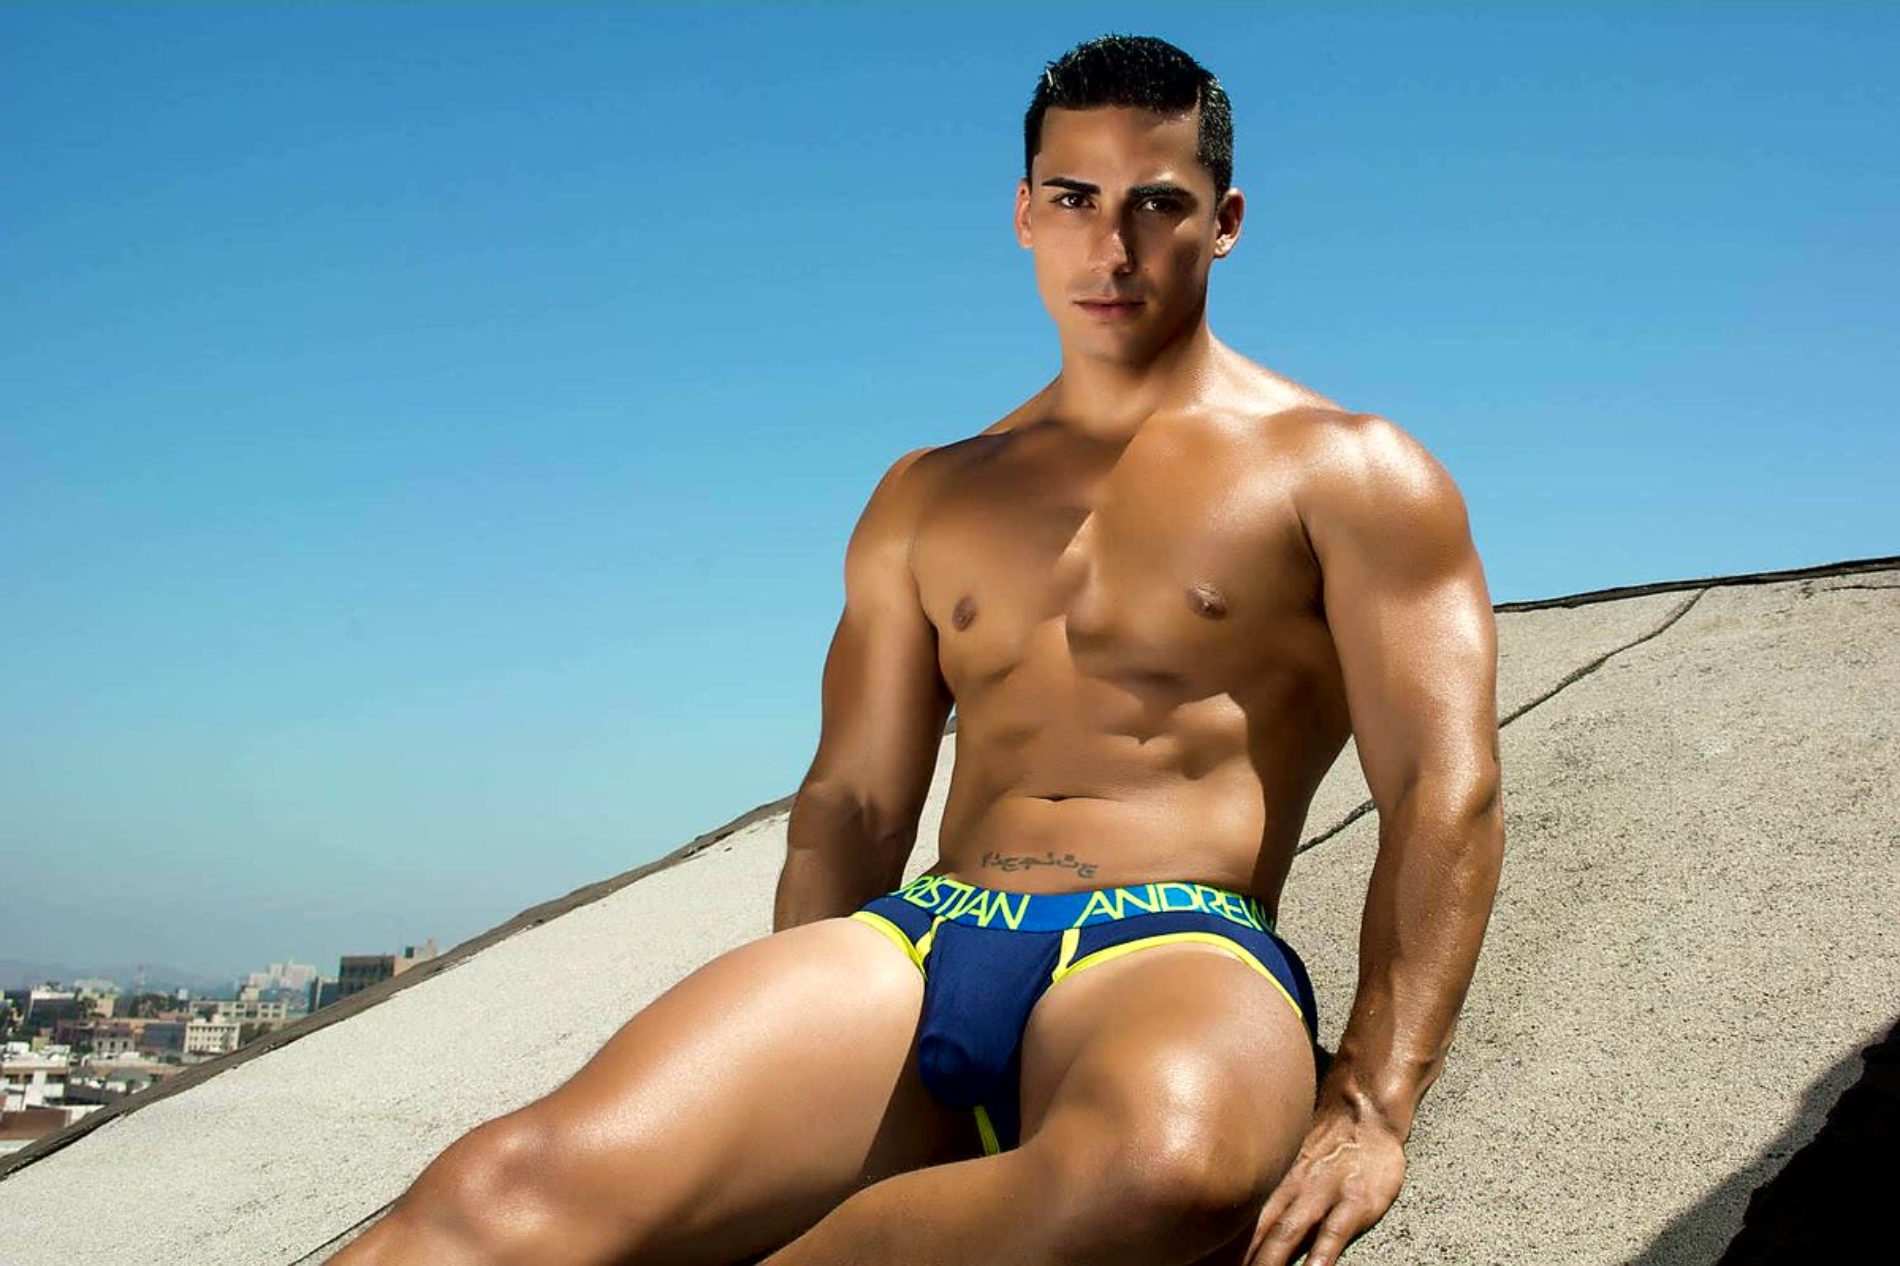 Andrew Christian suspends model Topher DiMaggio “indefinitely” amid sex assault accusations